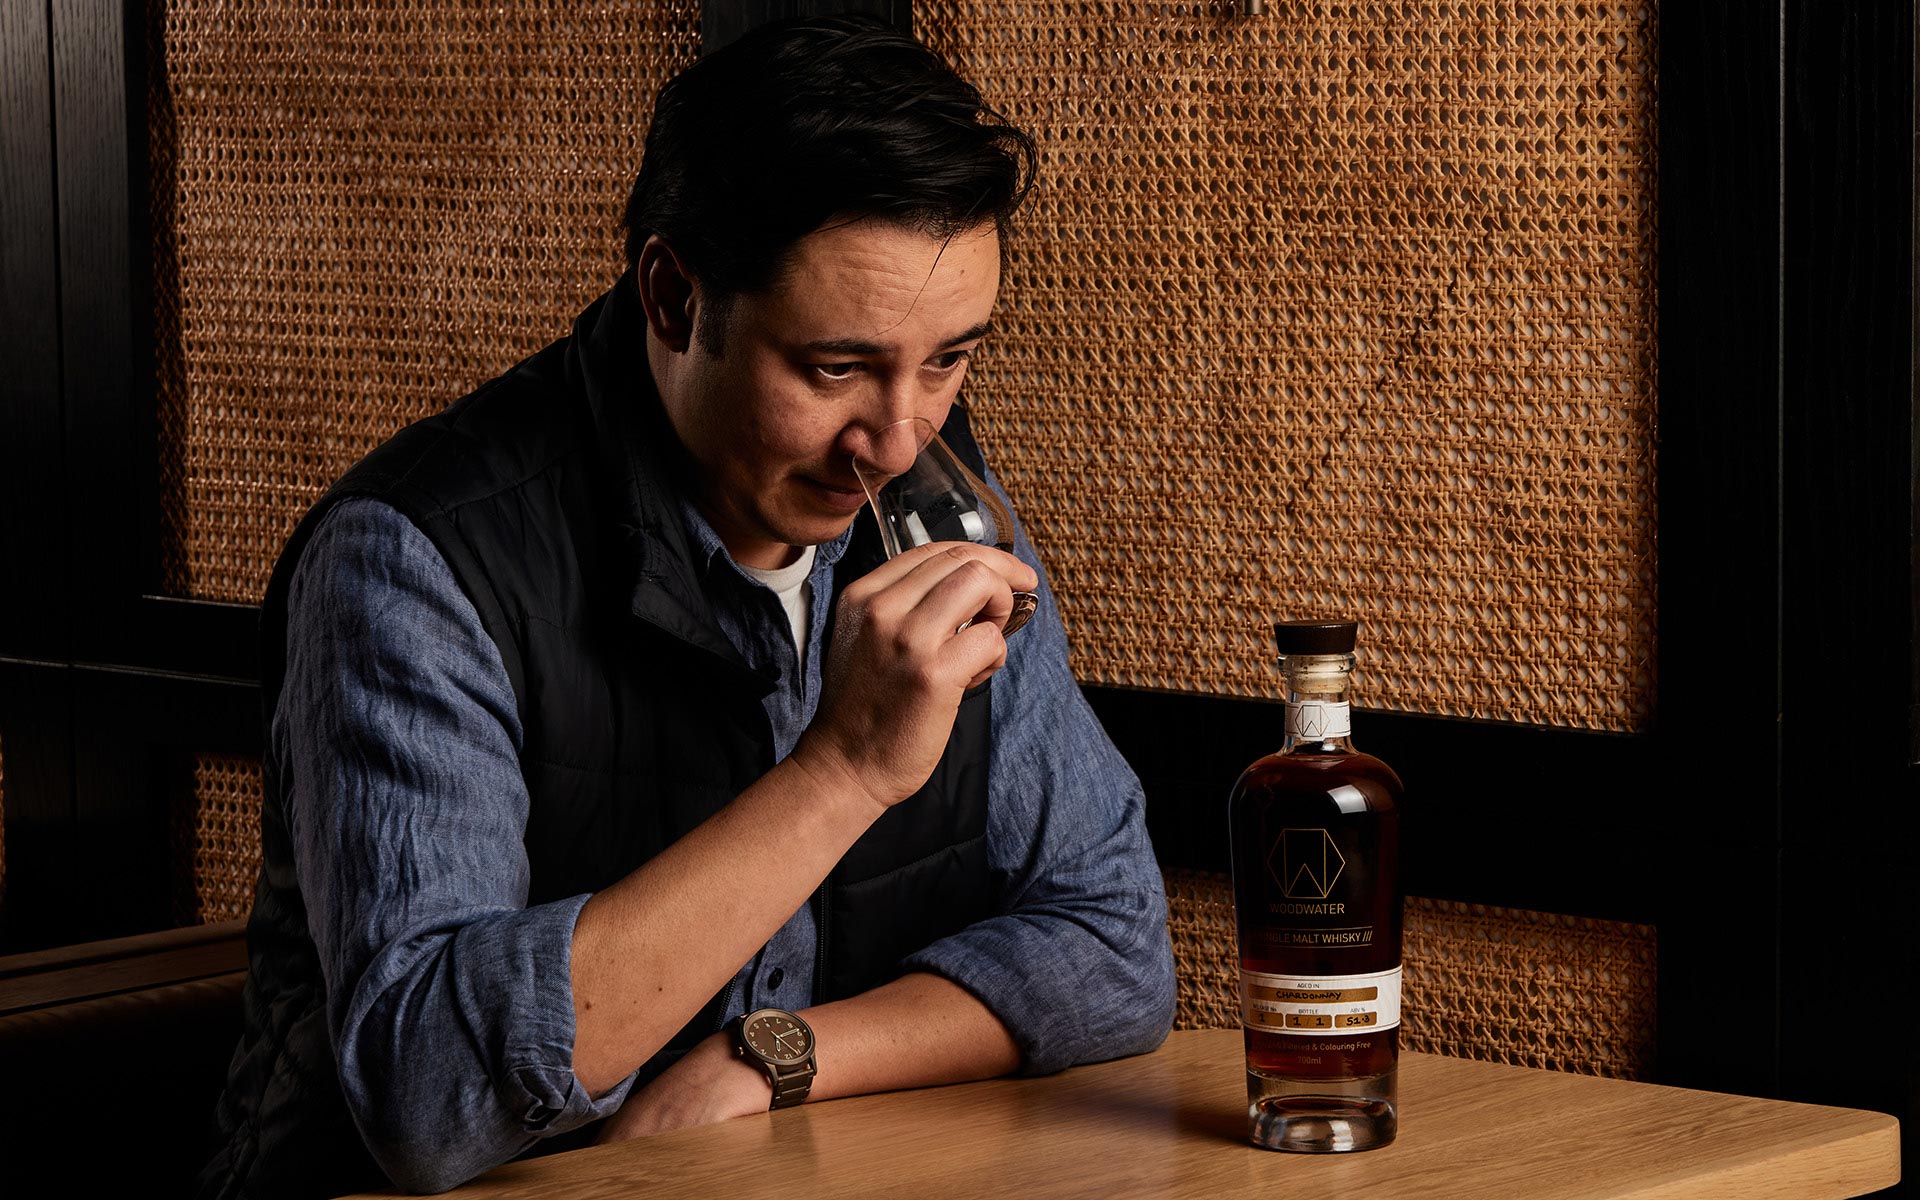 Woodwater – Distiller's Nose (male distiller enjoying the aroma of a glass of whisky)